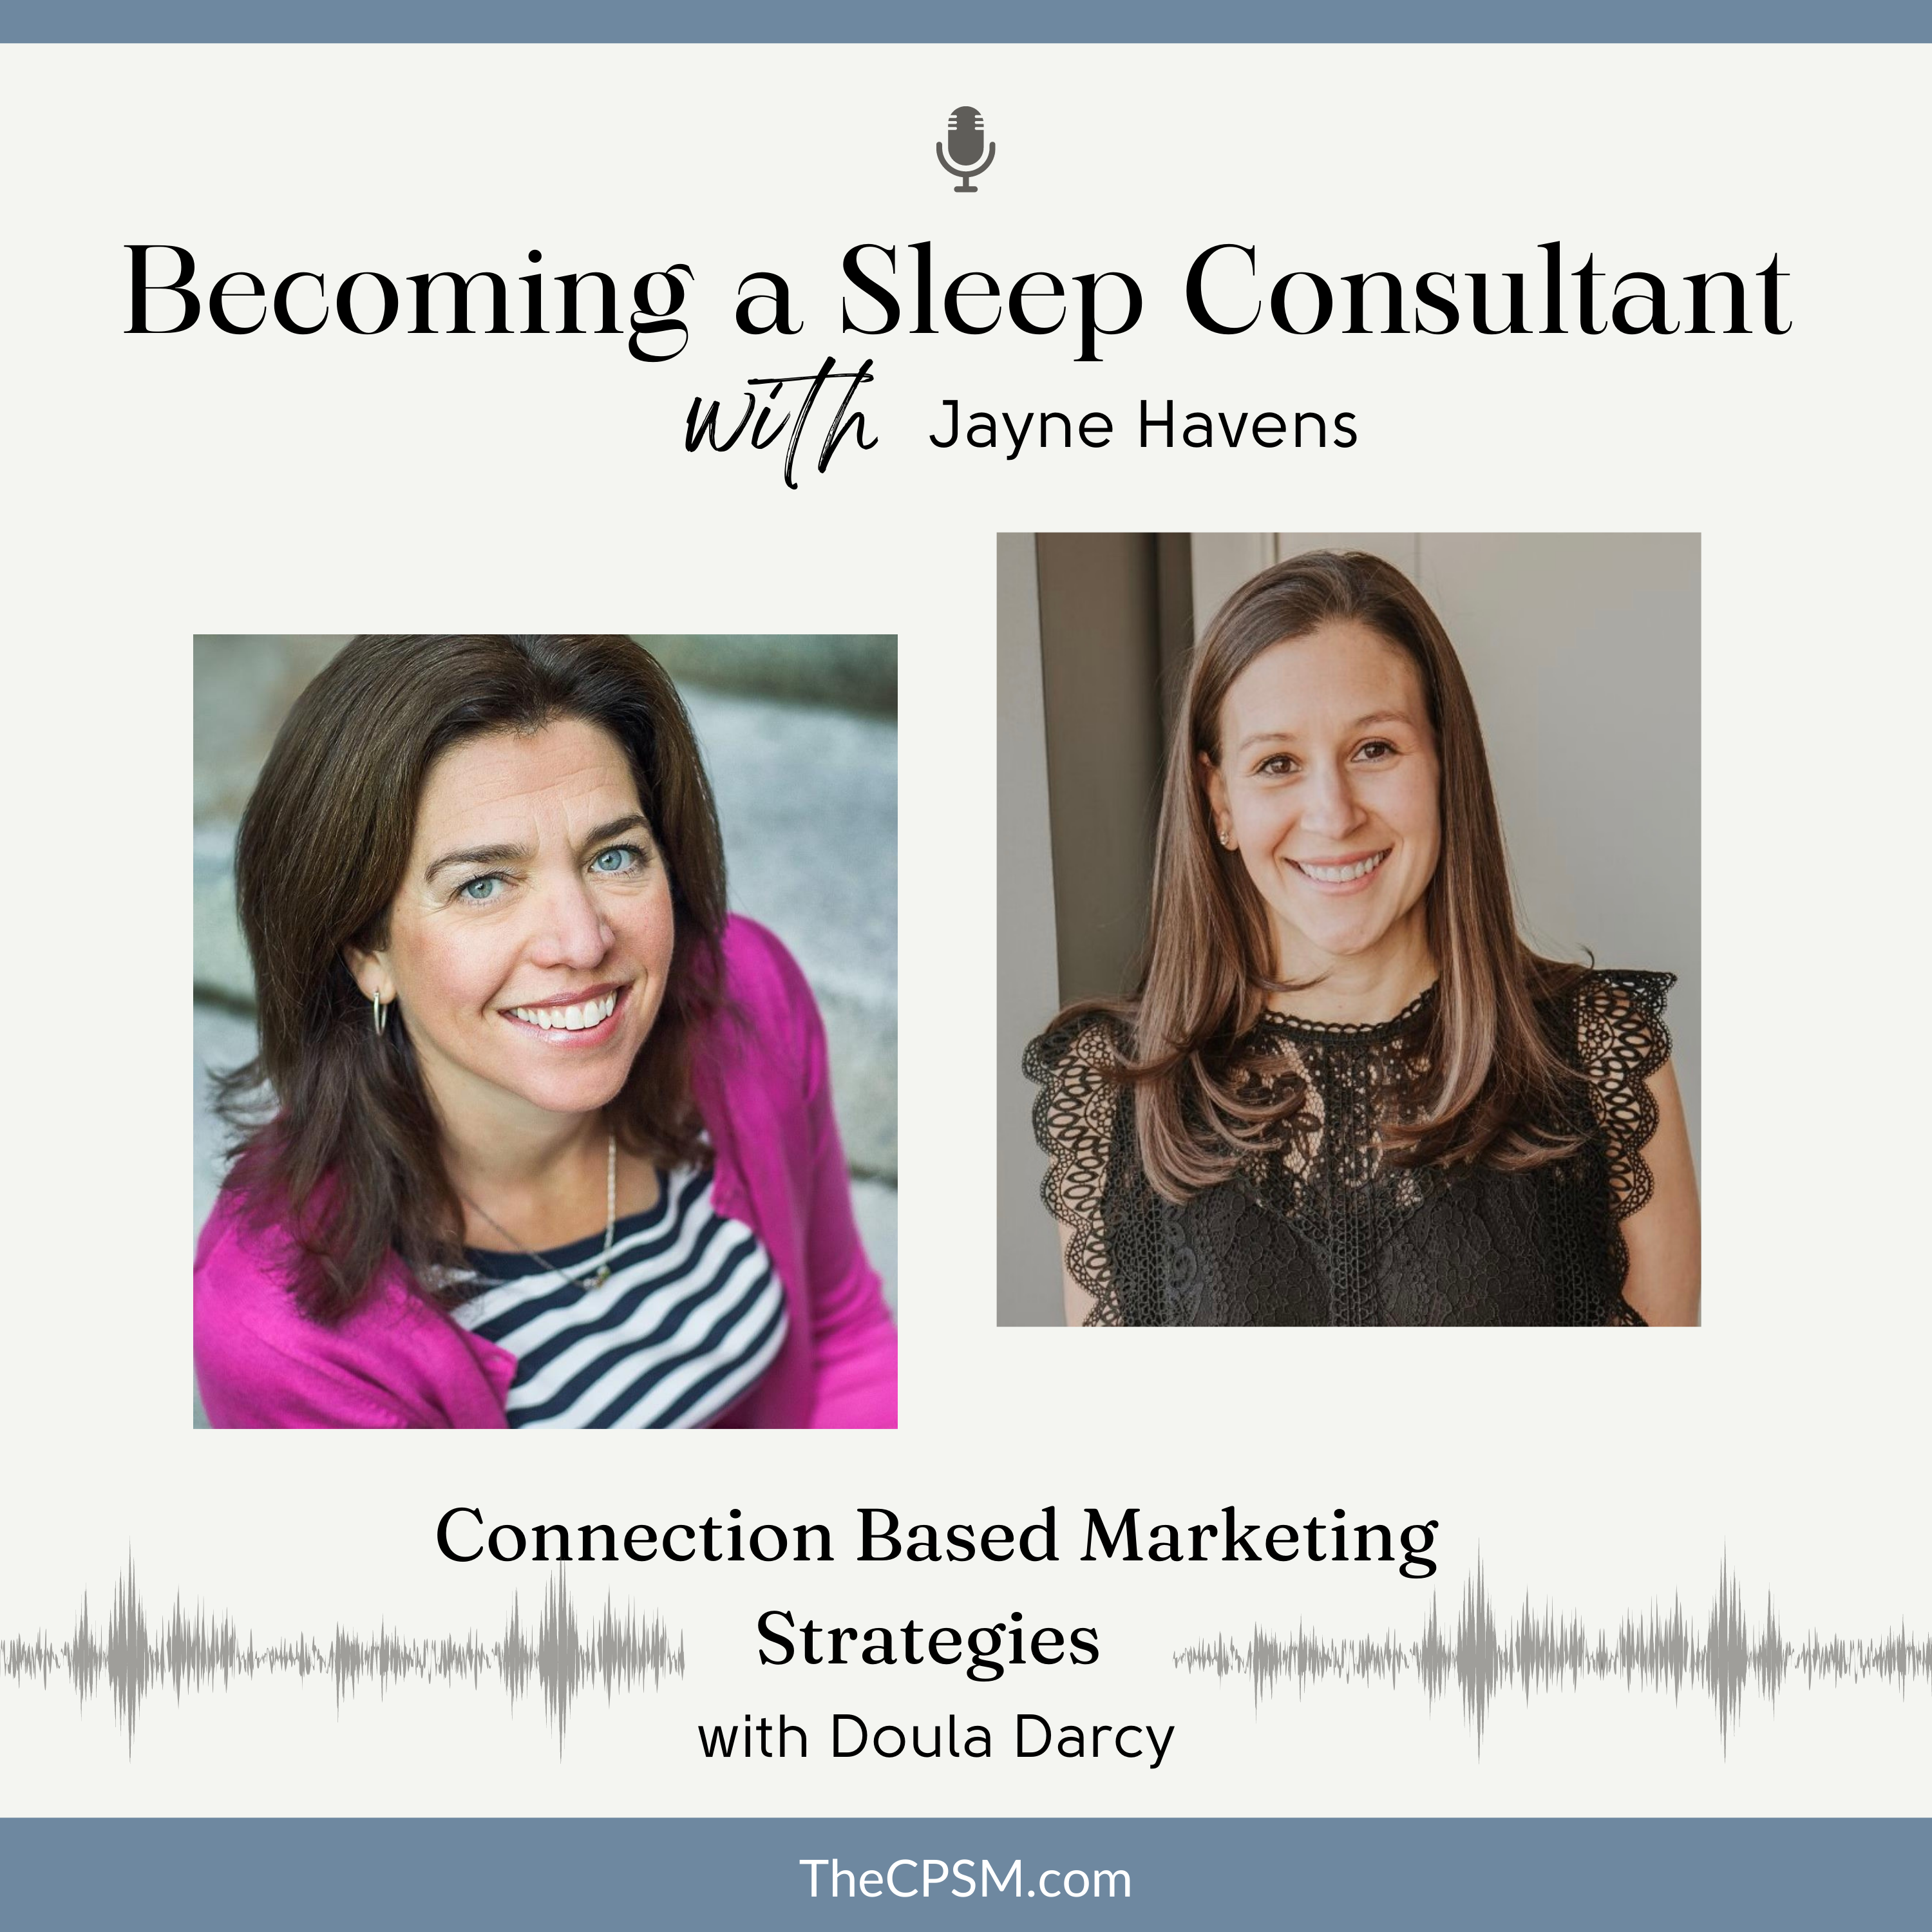 Connection Based Marketing Strategies with Doula Darcy